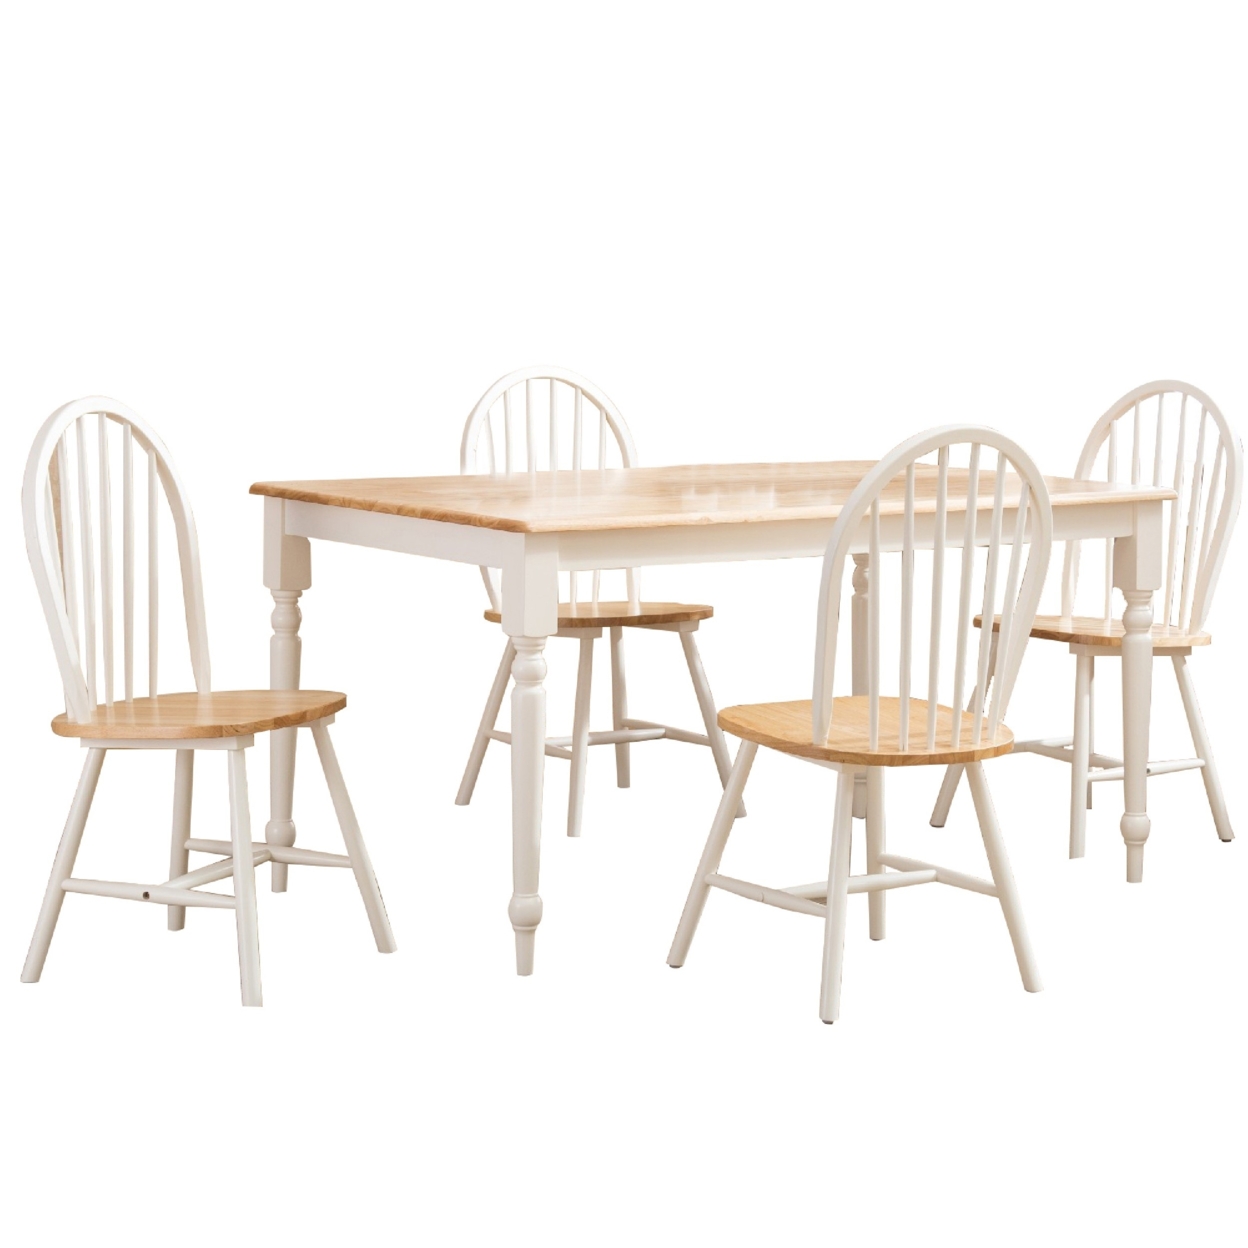 5 Piece Cottage Style Dining Table Set, 4 Windsor Back Chairs, White, Brown- Saltoro Sherpi